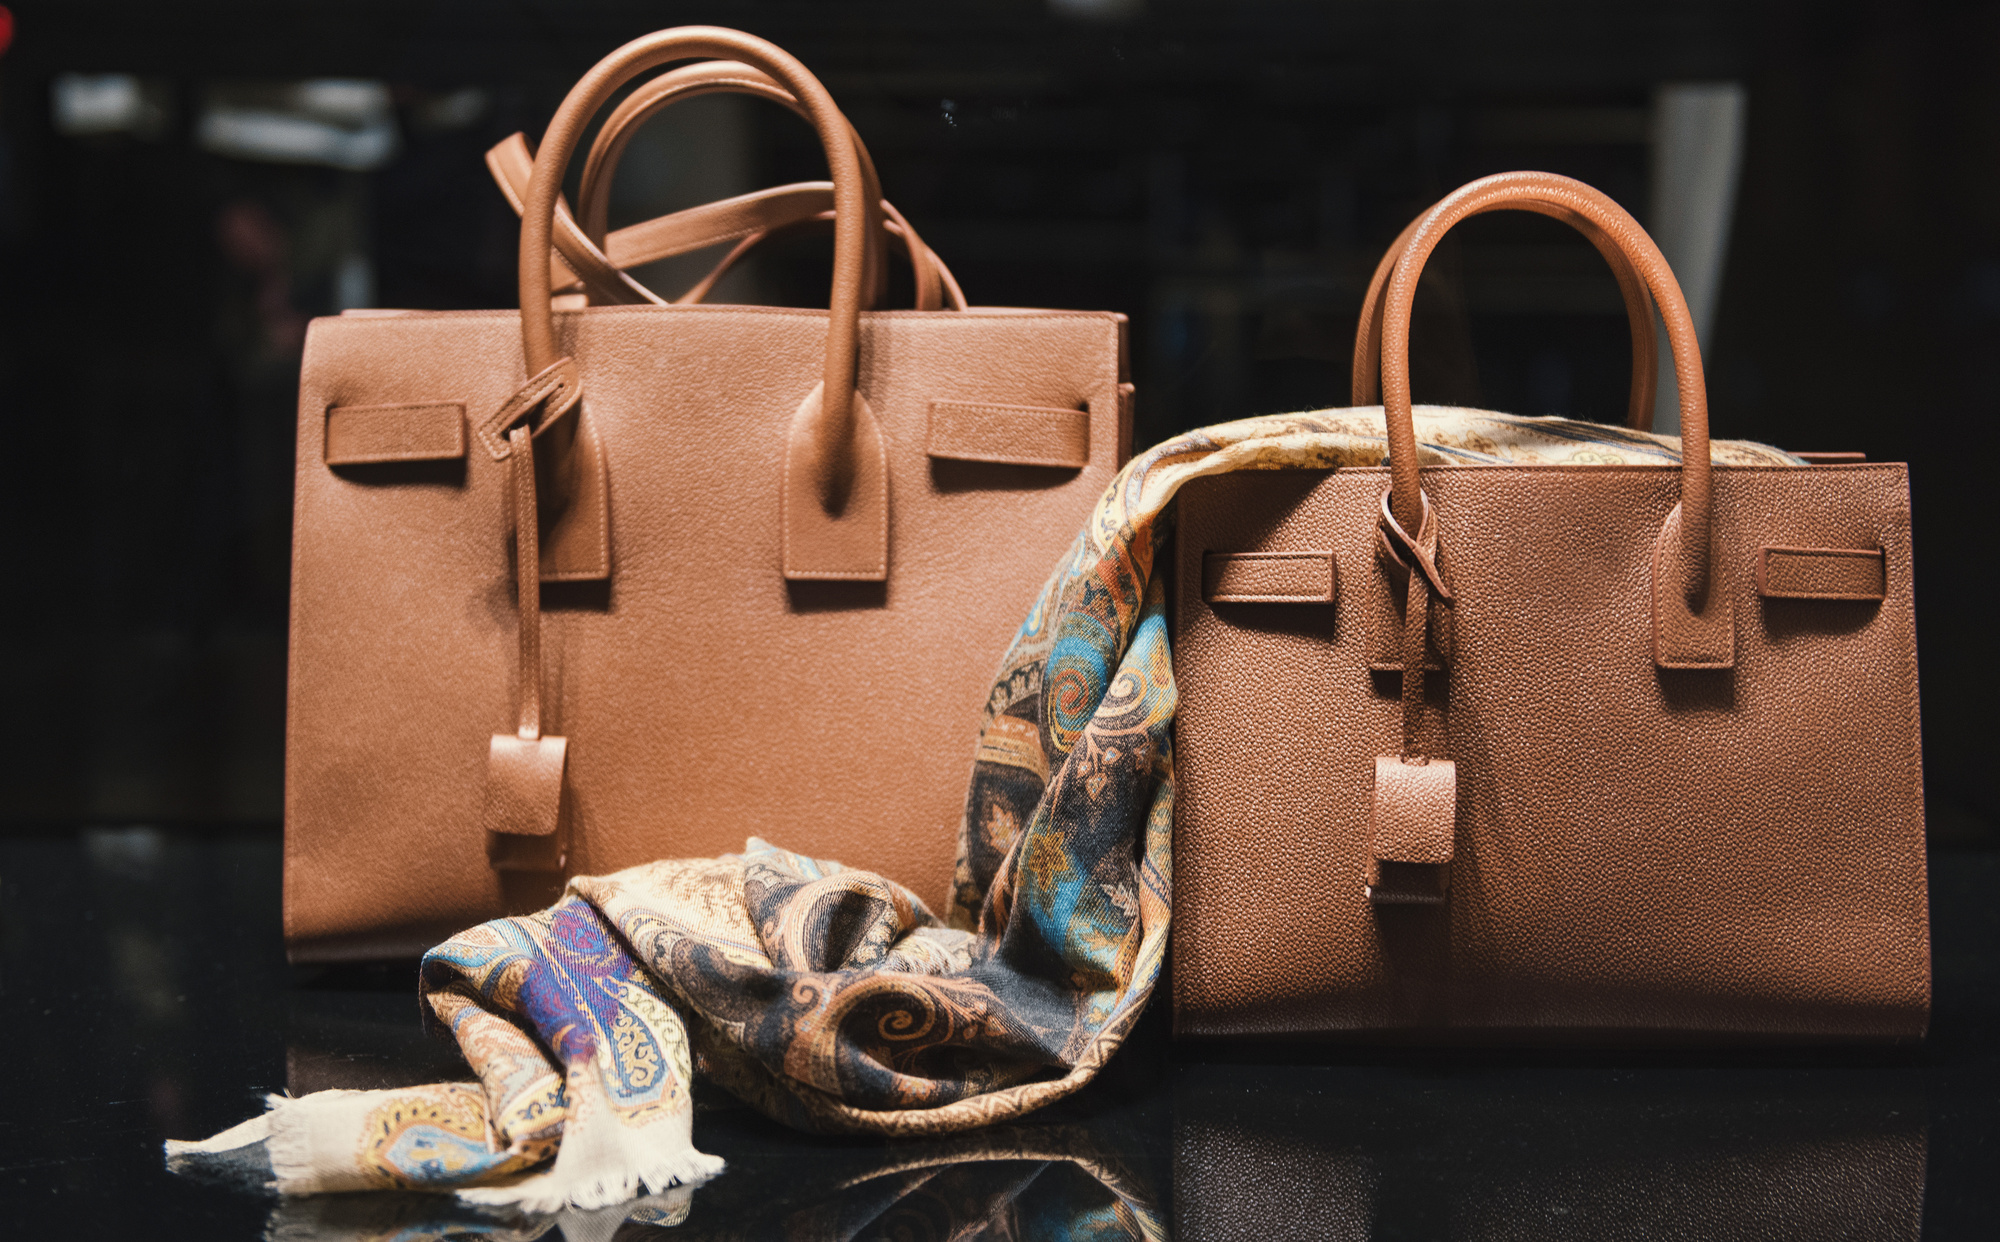 What to Consider When Buying a Used Handbag